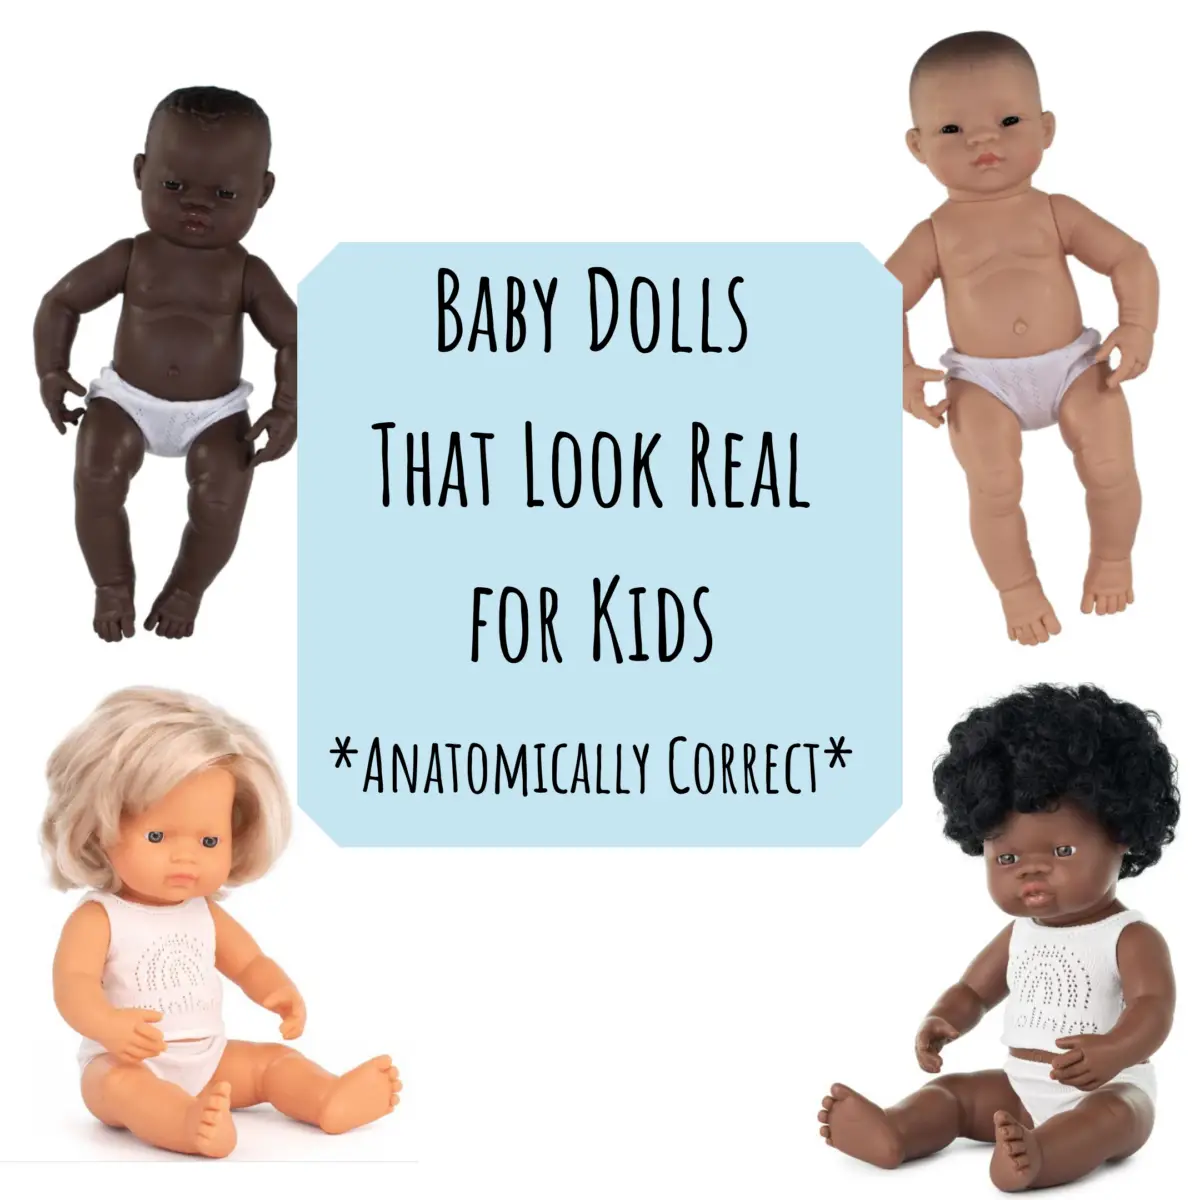 BABY DOLLS THAT LOOK REAL FOR KIDS